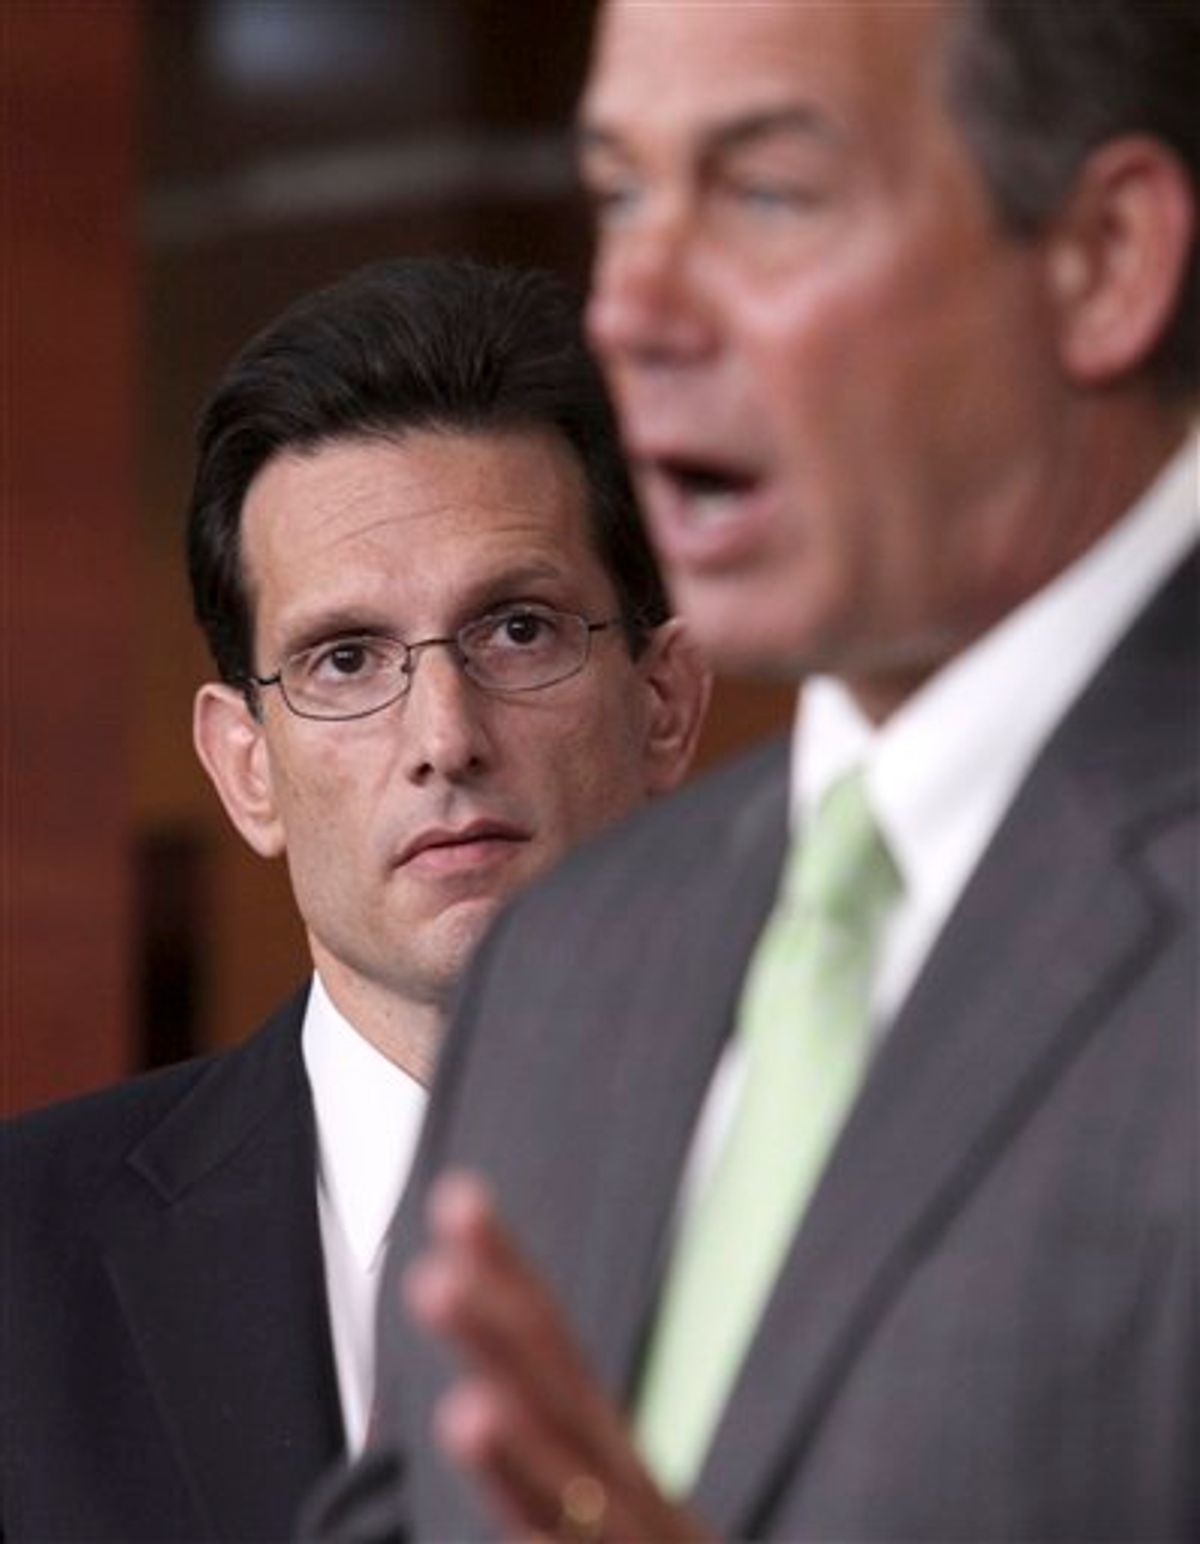 FILE - In this Jan. 20, 2010 file photo, House Minority Whip Eric Cantor of Va., left, listens As House Minority Leader John Boehner of Ohio speaks during a news conference on Capitol Hill in Washington. Republican leaders, ever more confident of their chances of winning control of the House and possibly the Senate, have begun plotting a 2011 agenda topped by a push for eye-popping spending cuts and attempts to undo key parts of President Barack Obama's health care and financial regulation laws.  (AP Photo/Lauren Victoria Burke, File)  (AP)